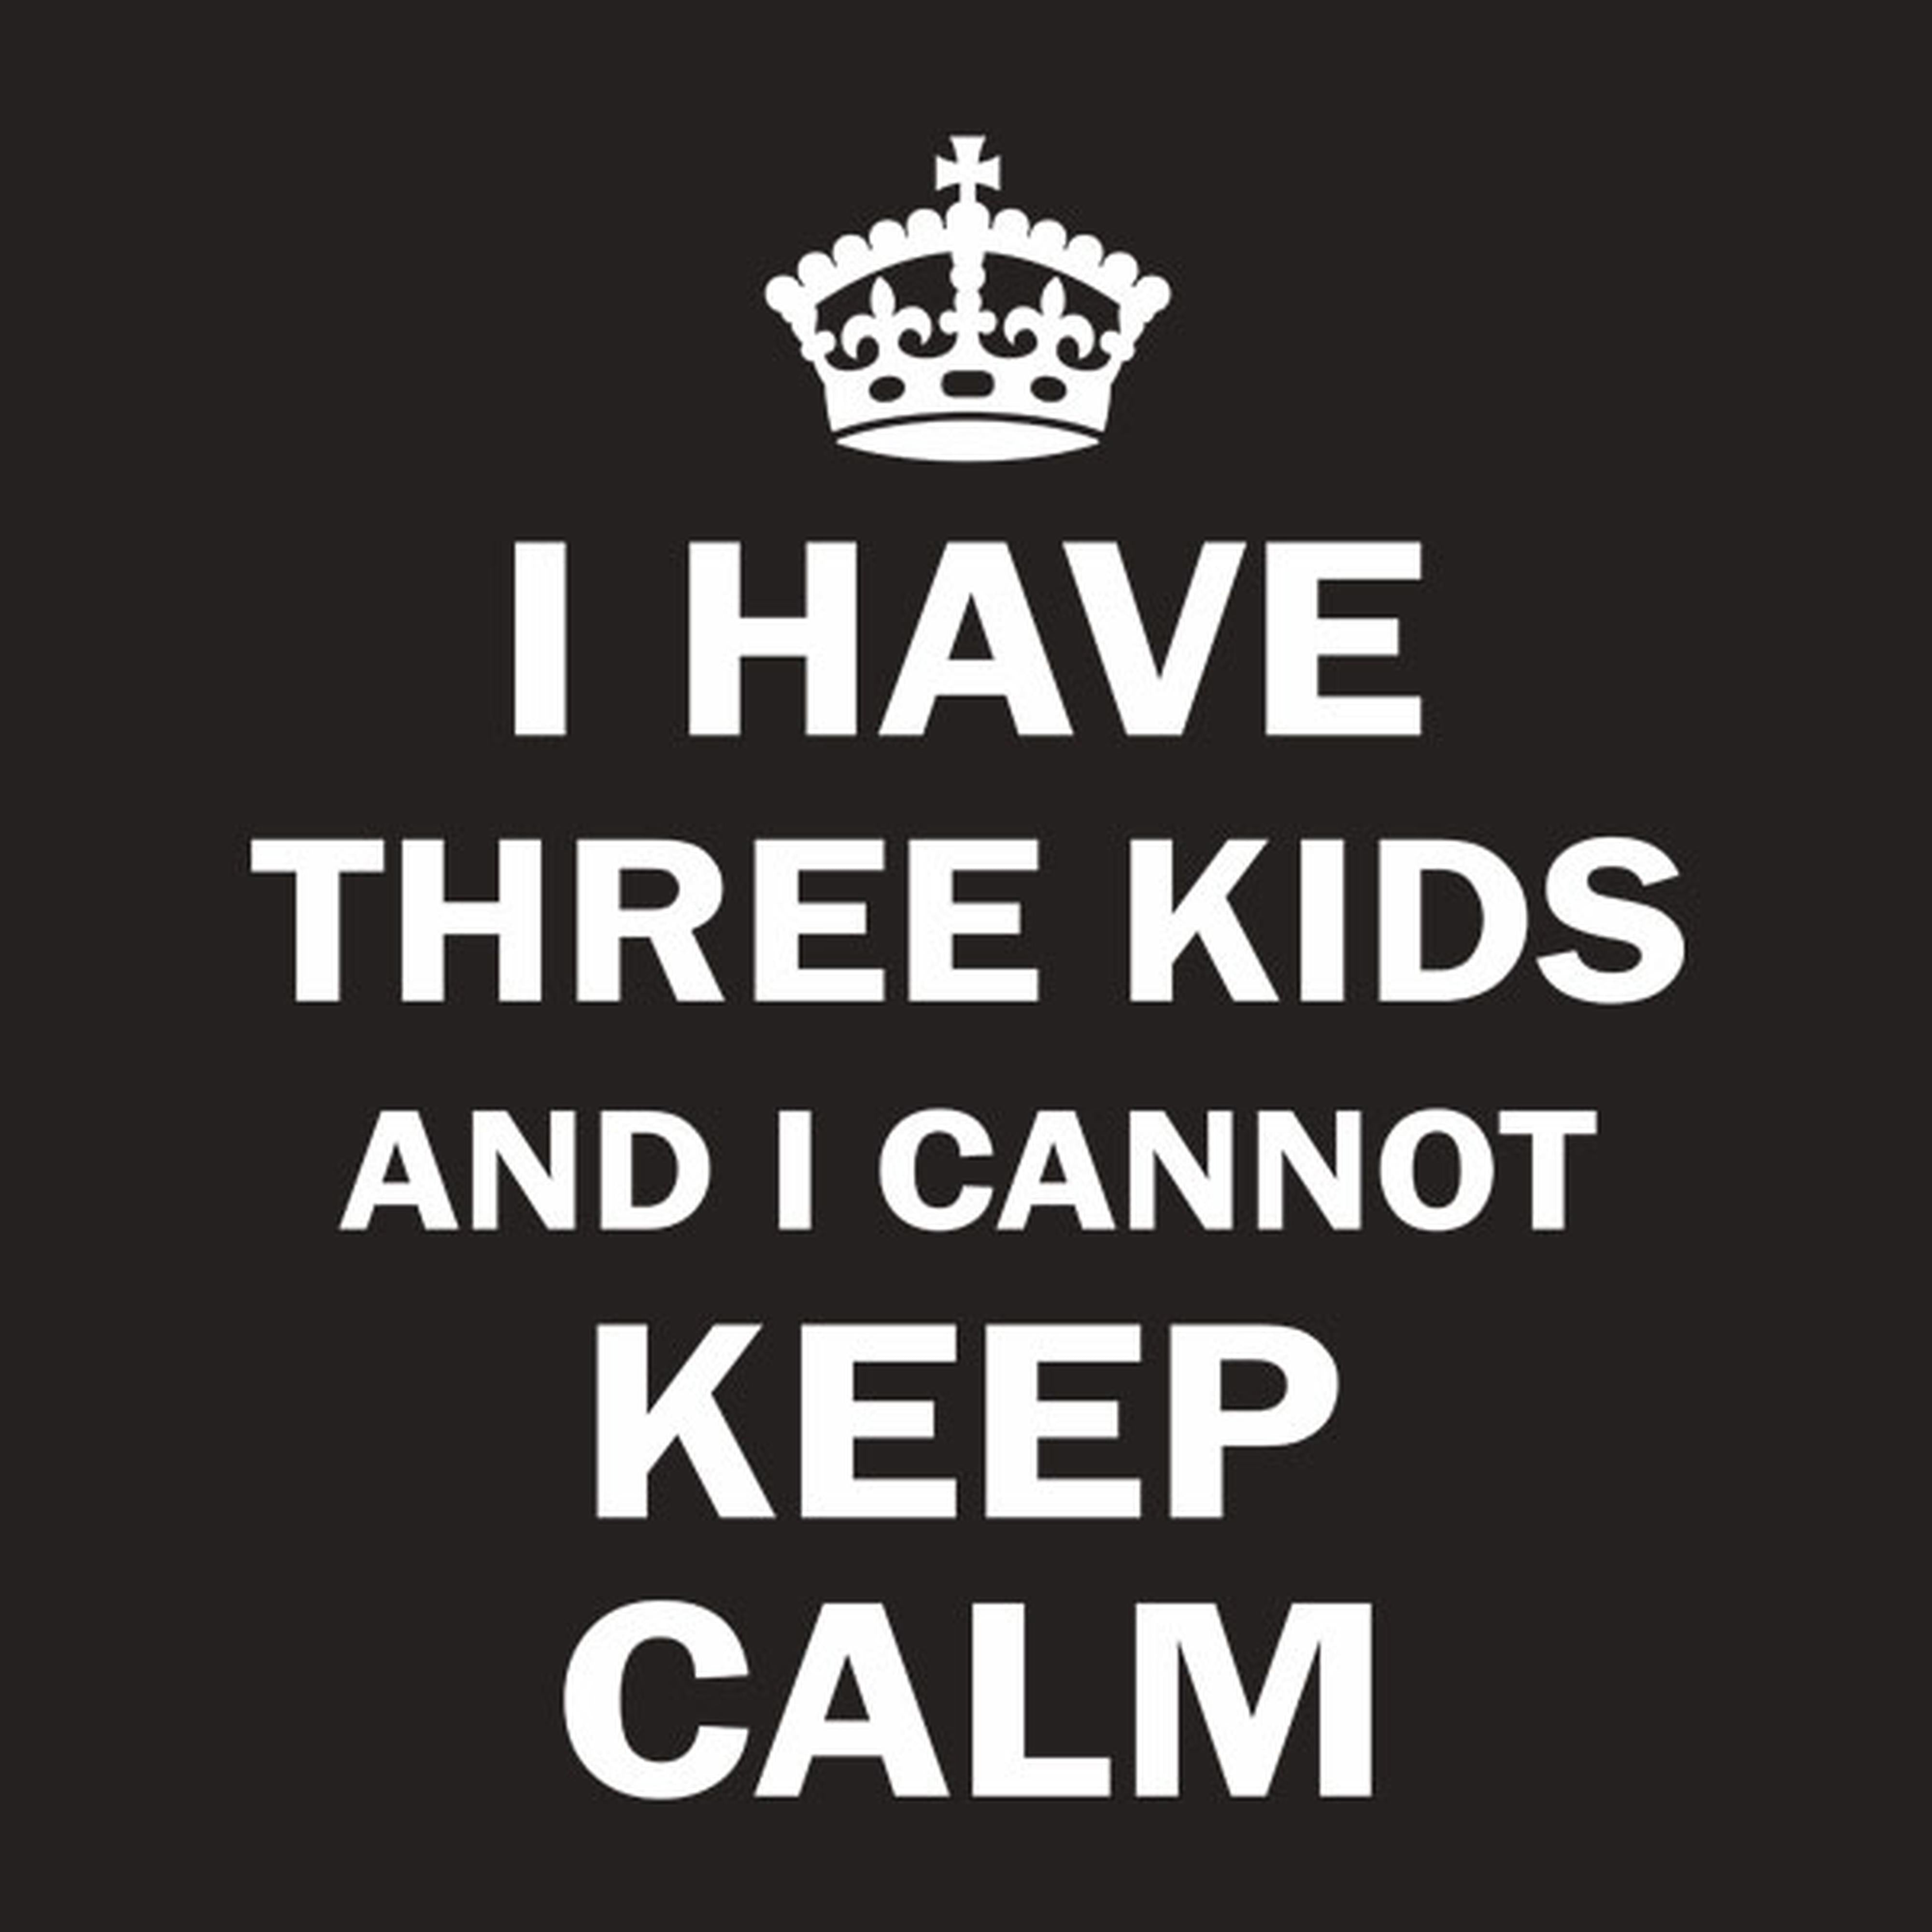 I have 3 kids and I cannot keep calm - T-shirt